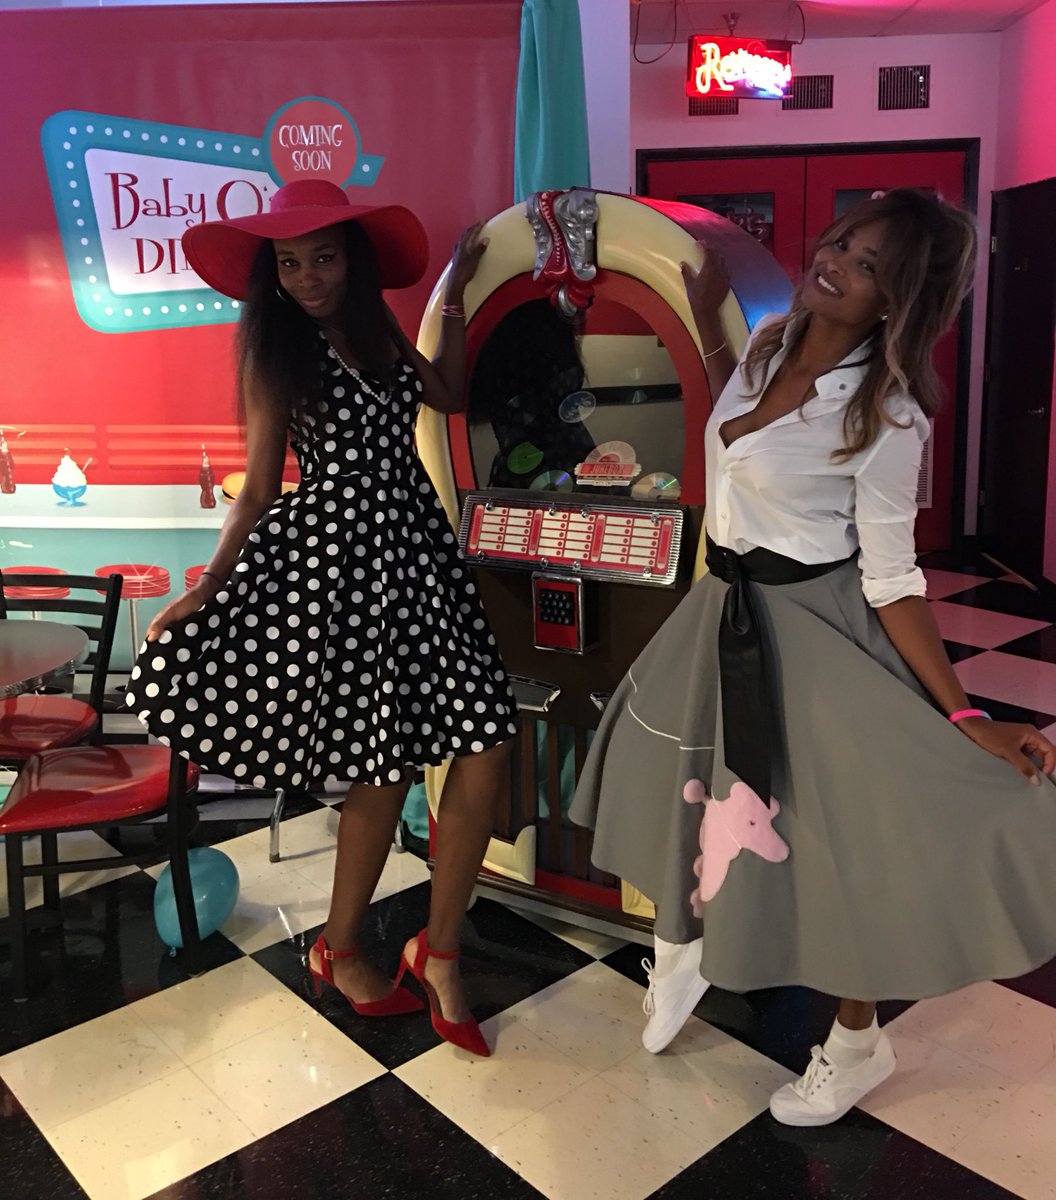 Me and @VenusWilliams At The Baby O Diner ????????????
#ShakeRattleRoll2017 https://t.co/TywQrr6Dtk